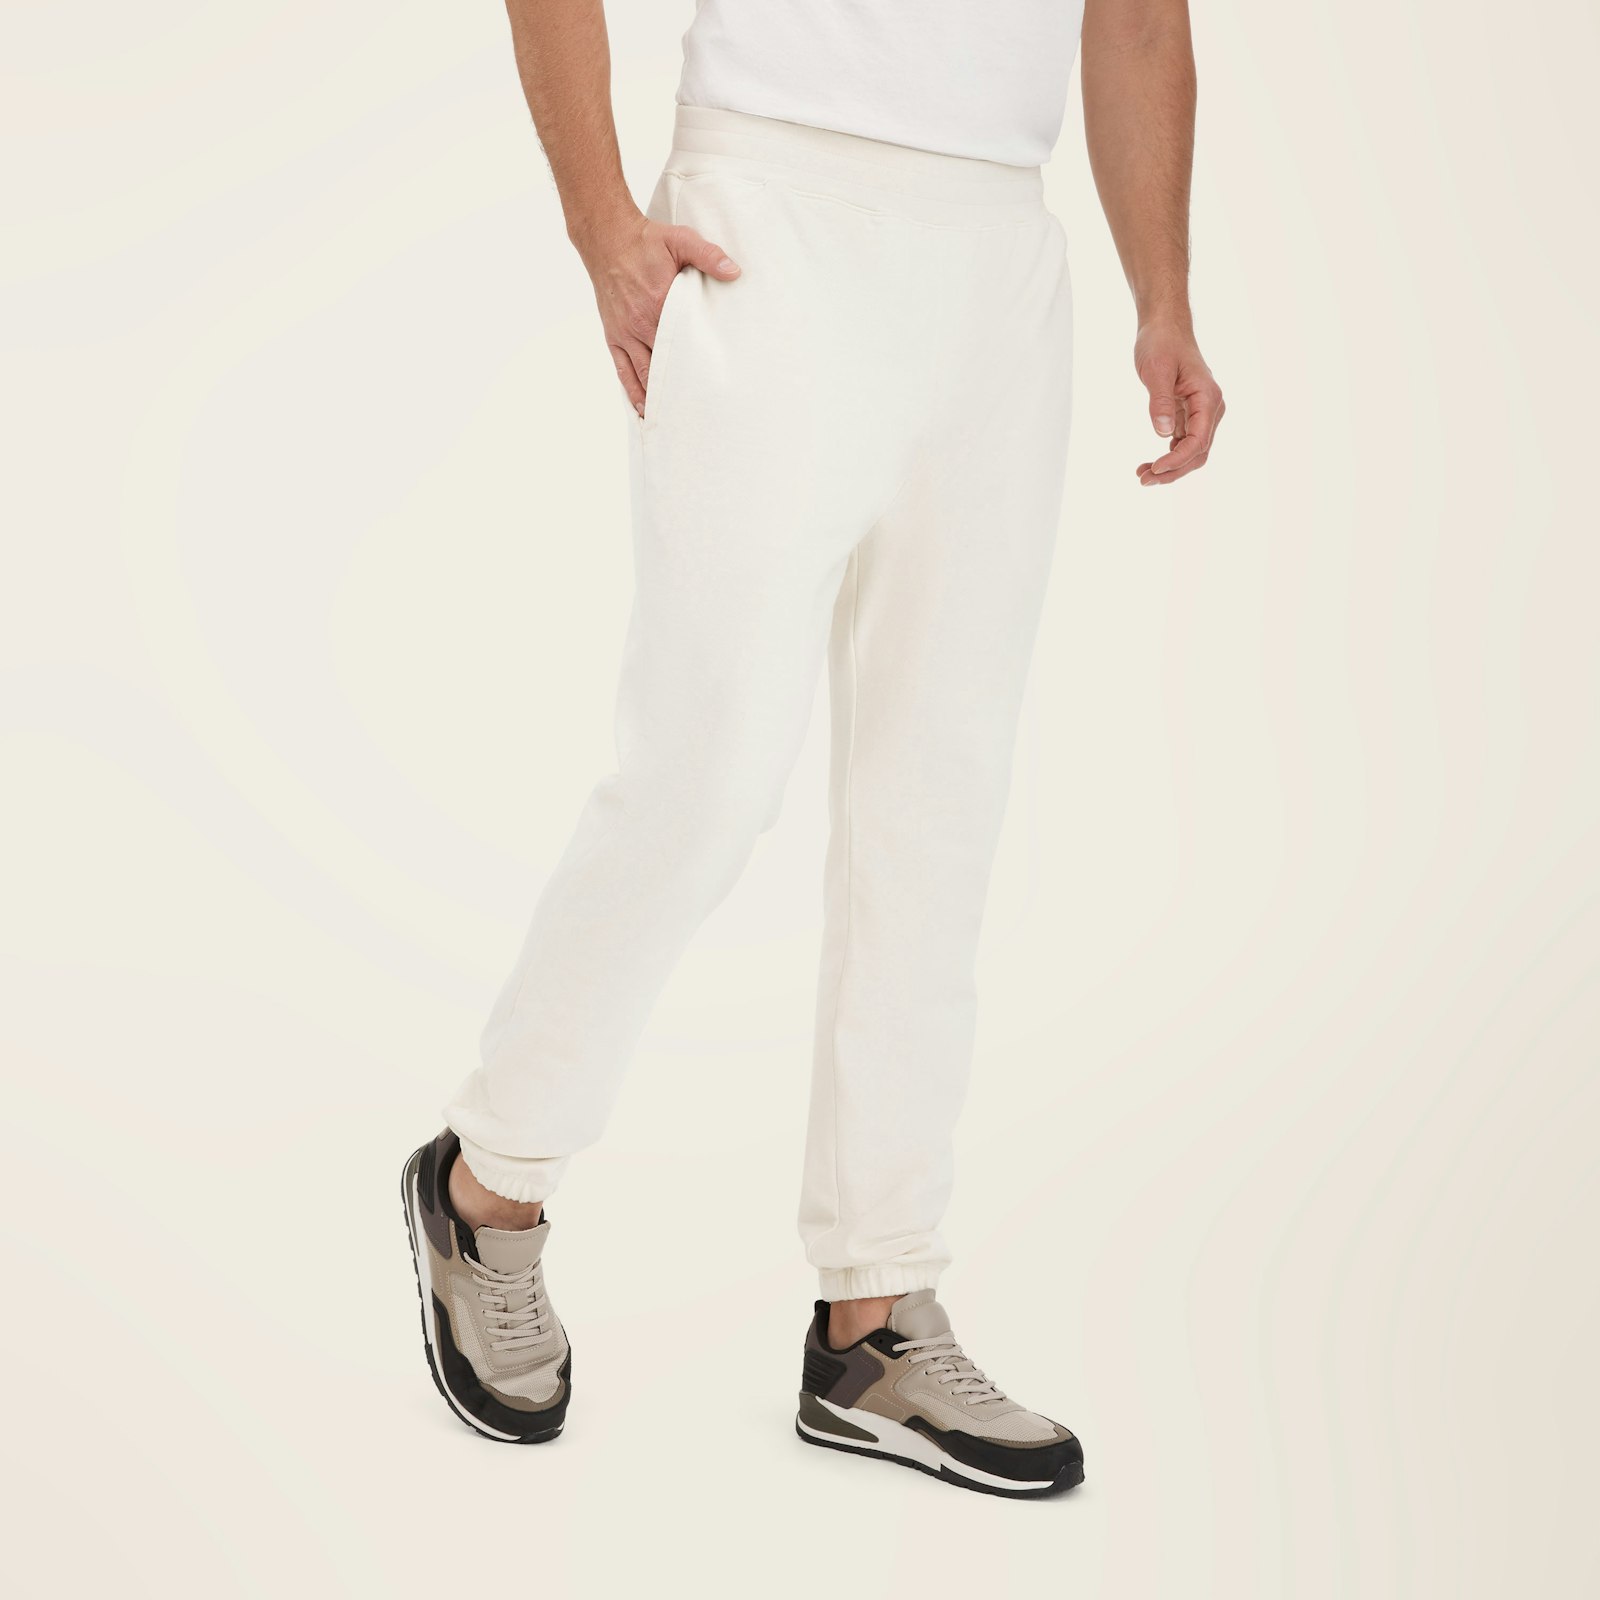 UnisexRecycledTerrySweatpants_OffWhite_Mens_OnFigure_1x1_0774.jpg